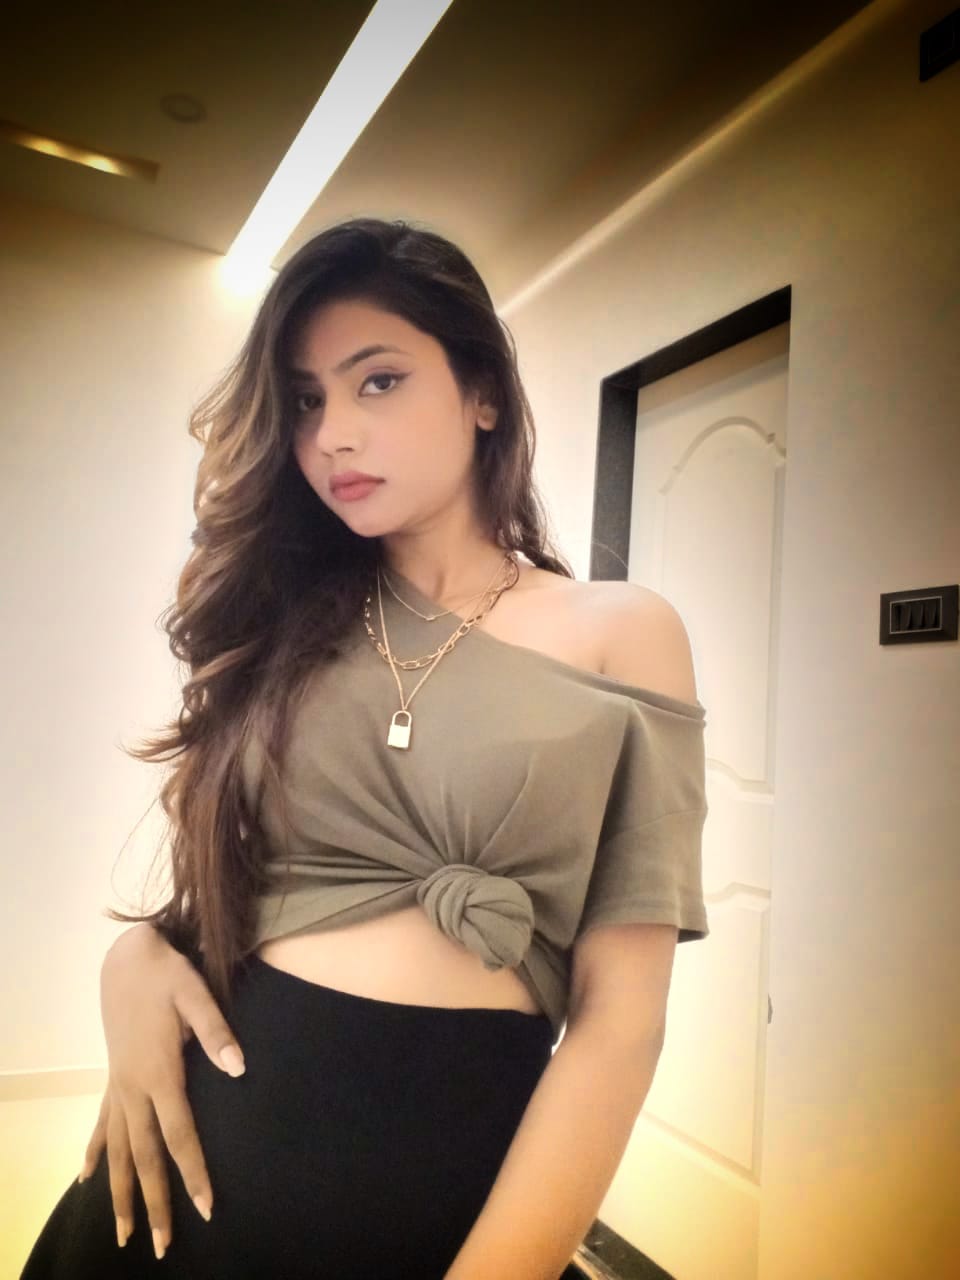 Want to have sex with a busty girl in Patna